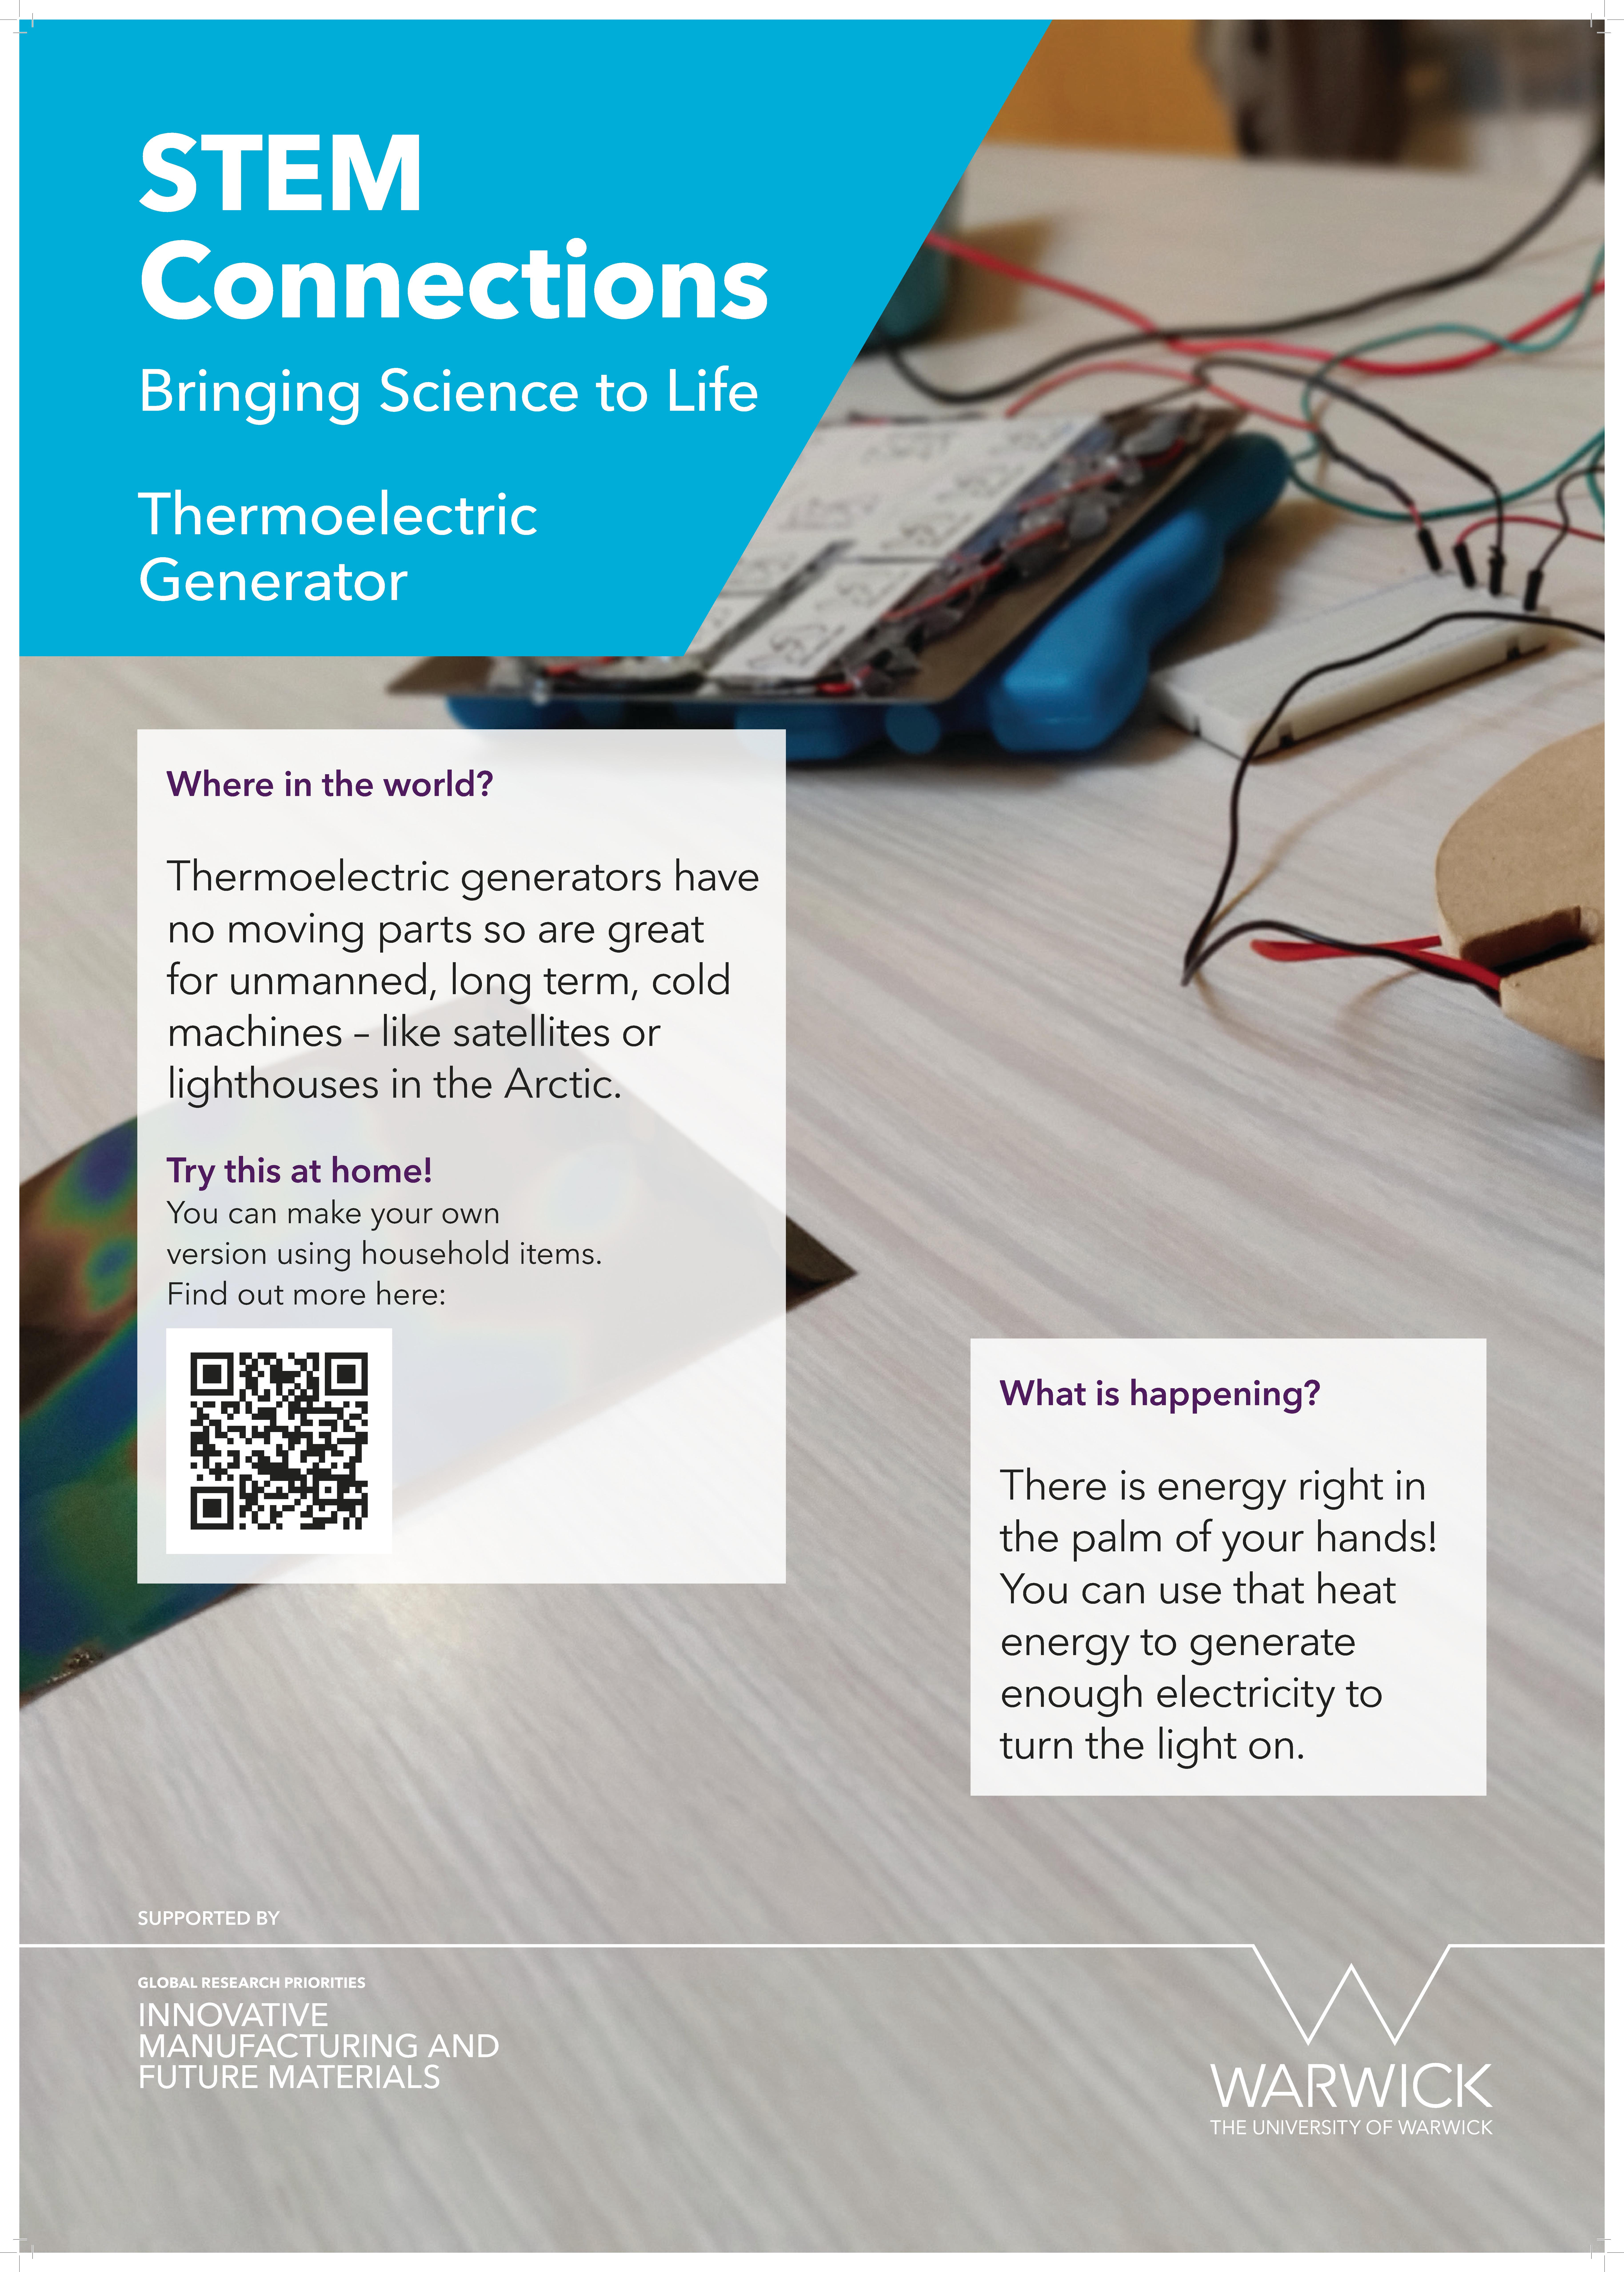 99878_stem_connections_posters_-_thermoelectric_generator.jpg